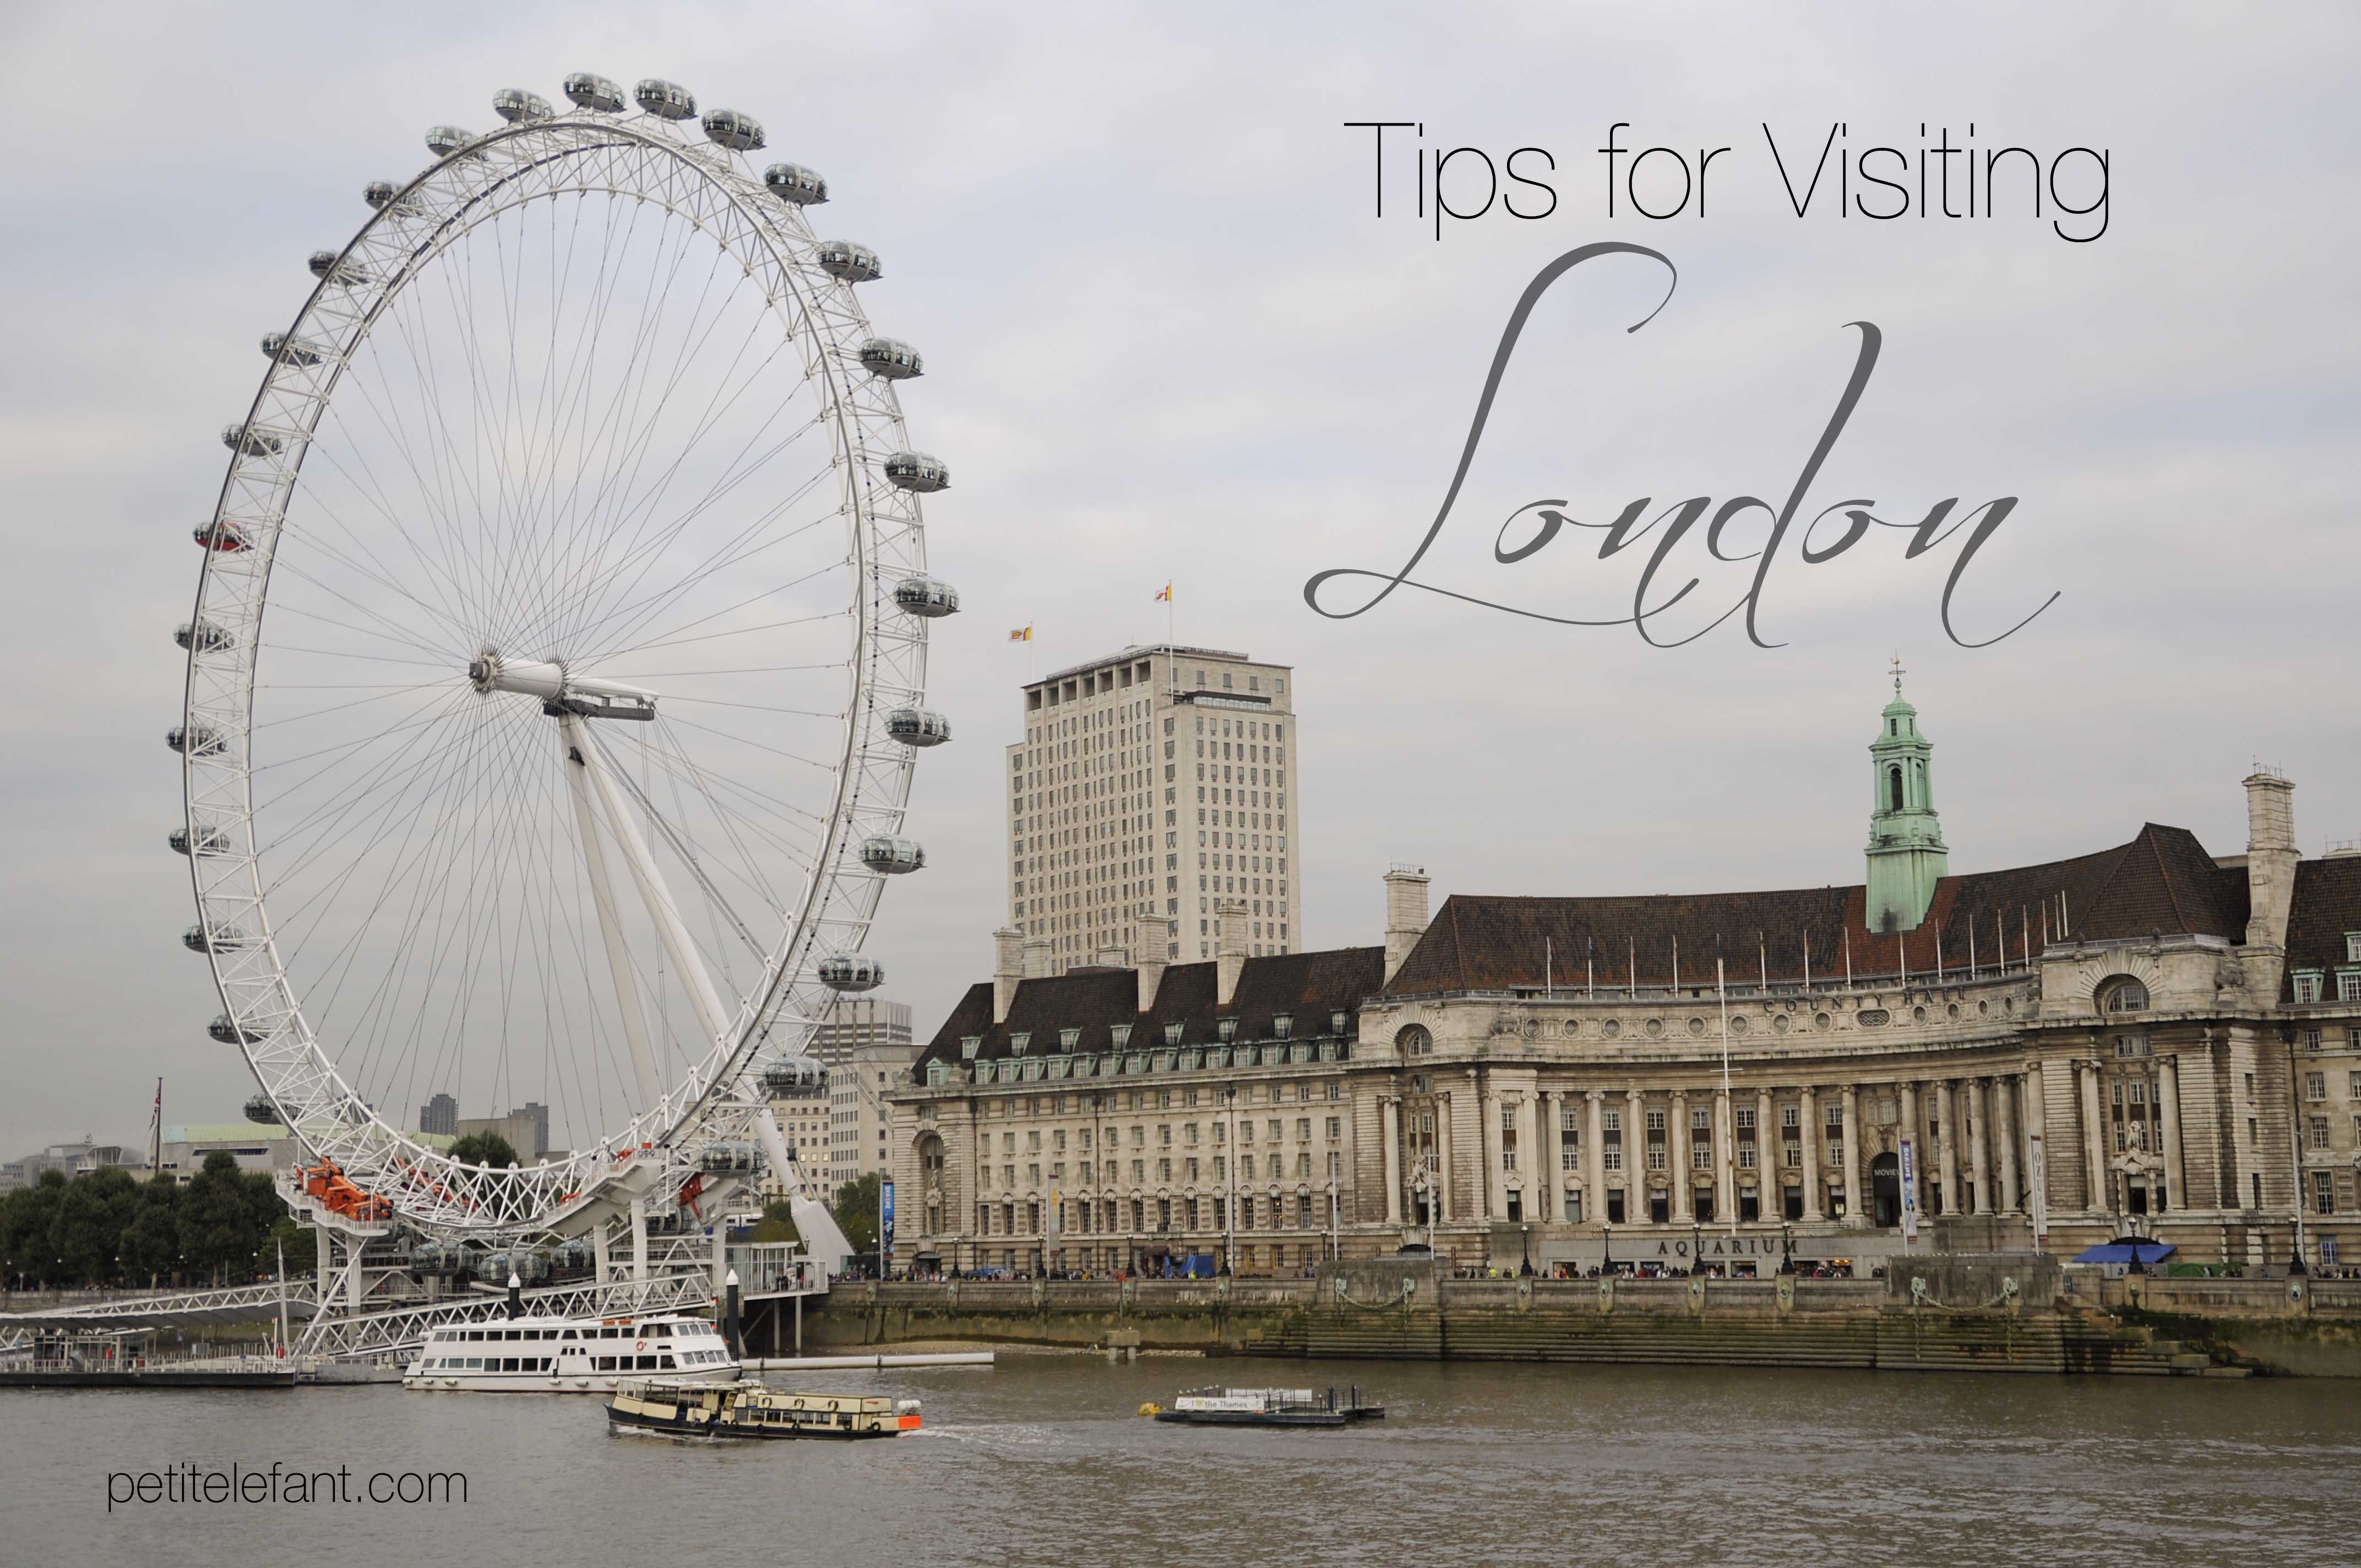 Tips for Visiting London